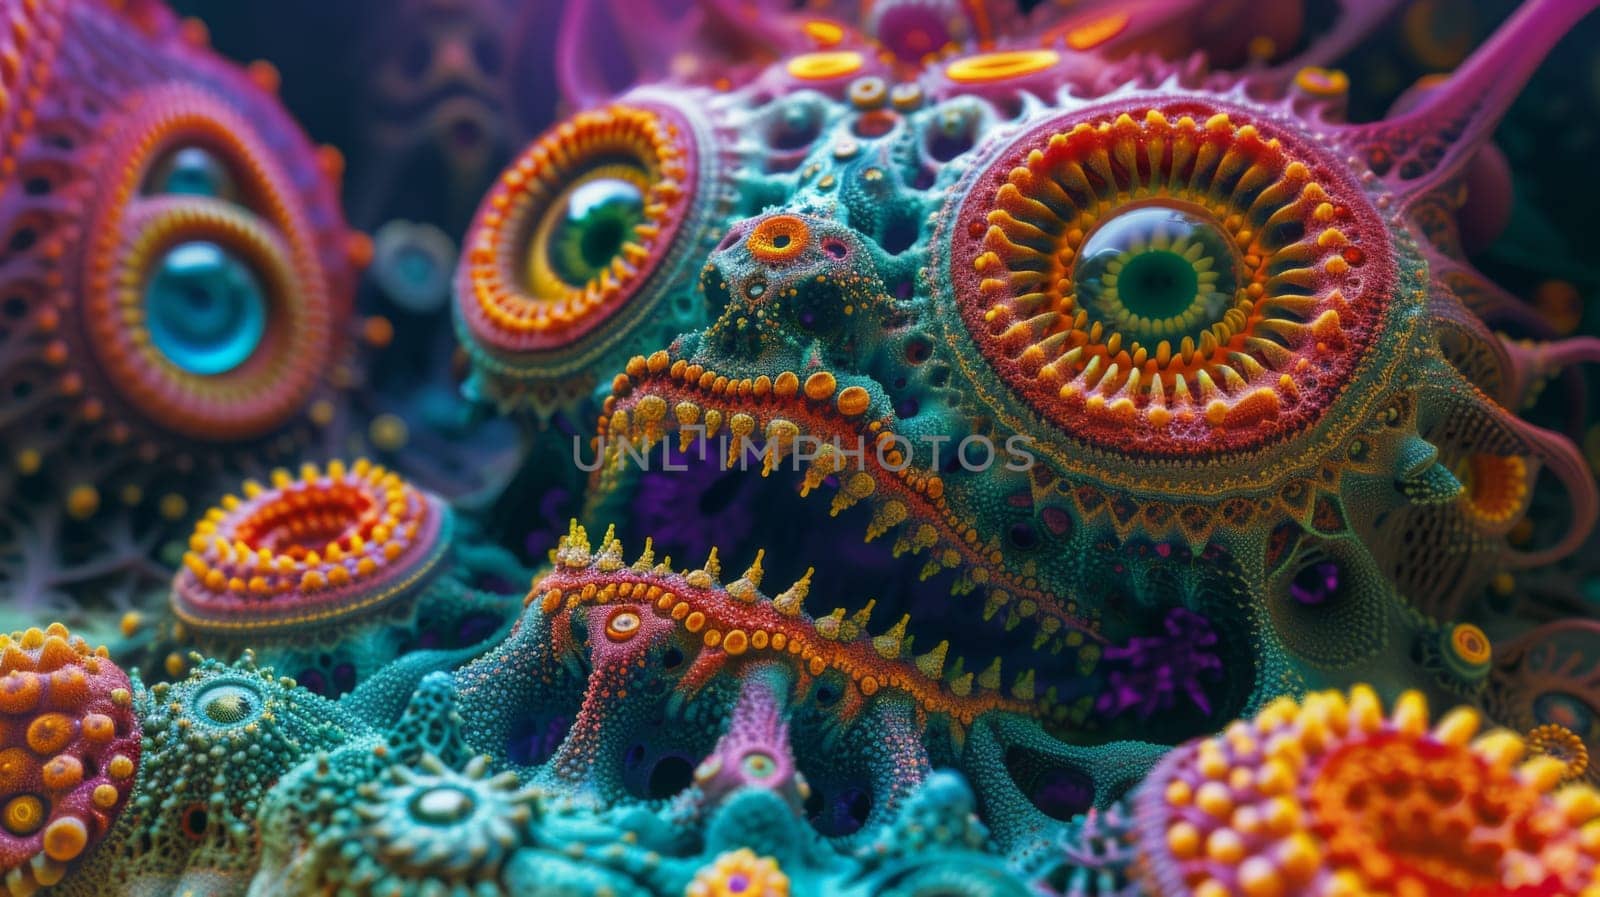 A colorful sculpture of a monster with many eyes and teeth, AI by starush